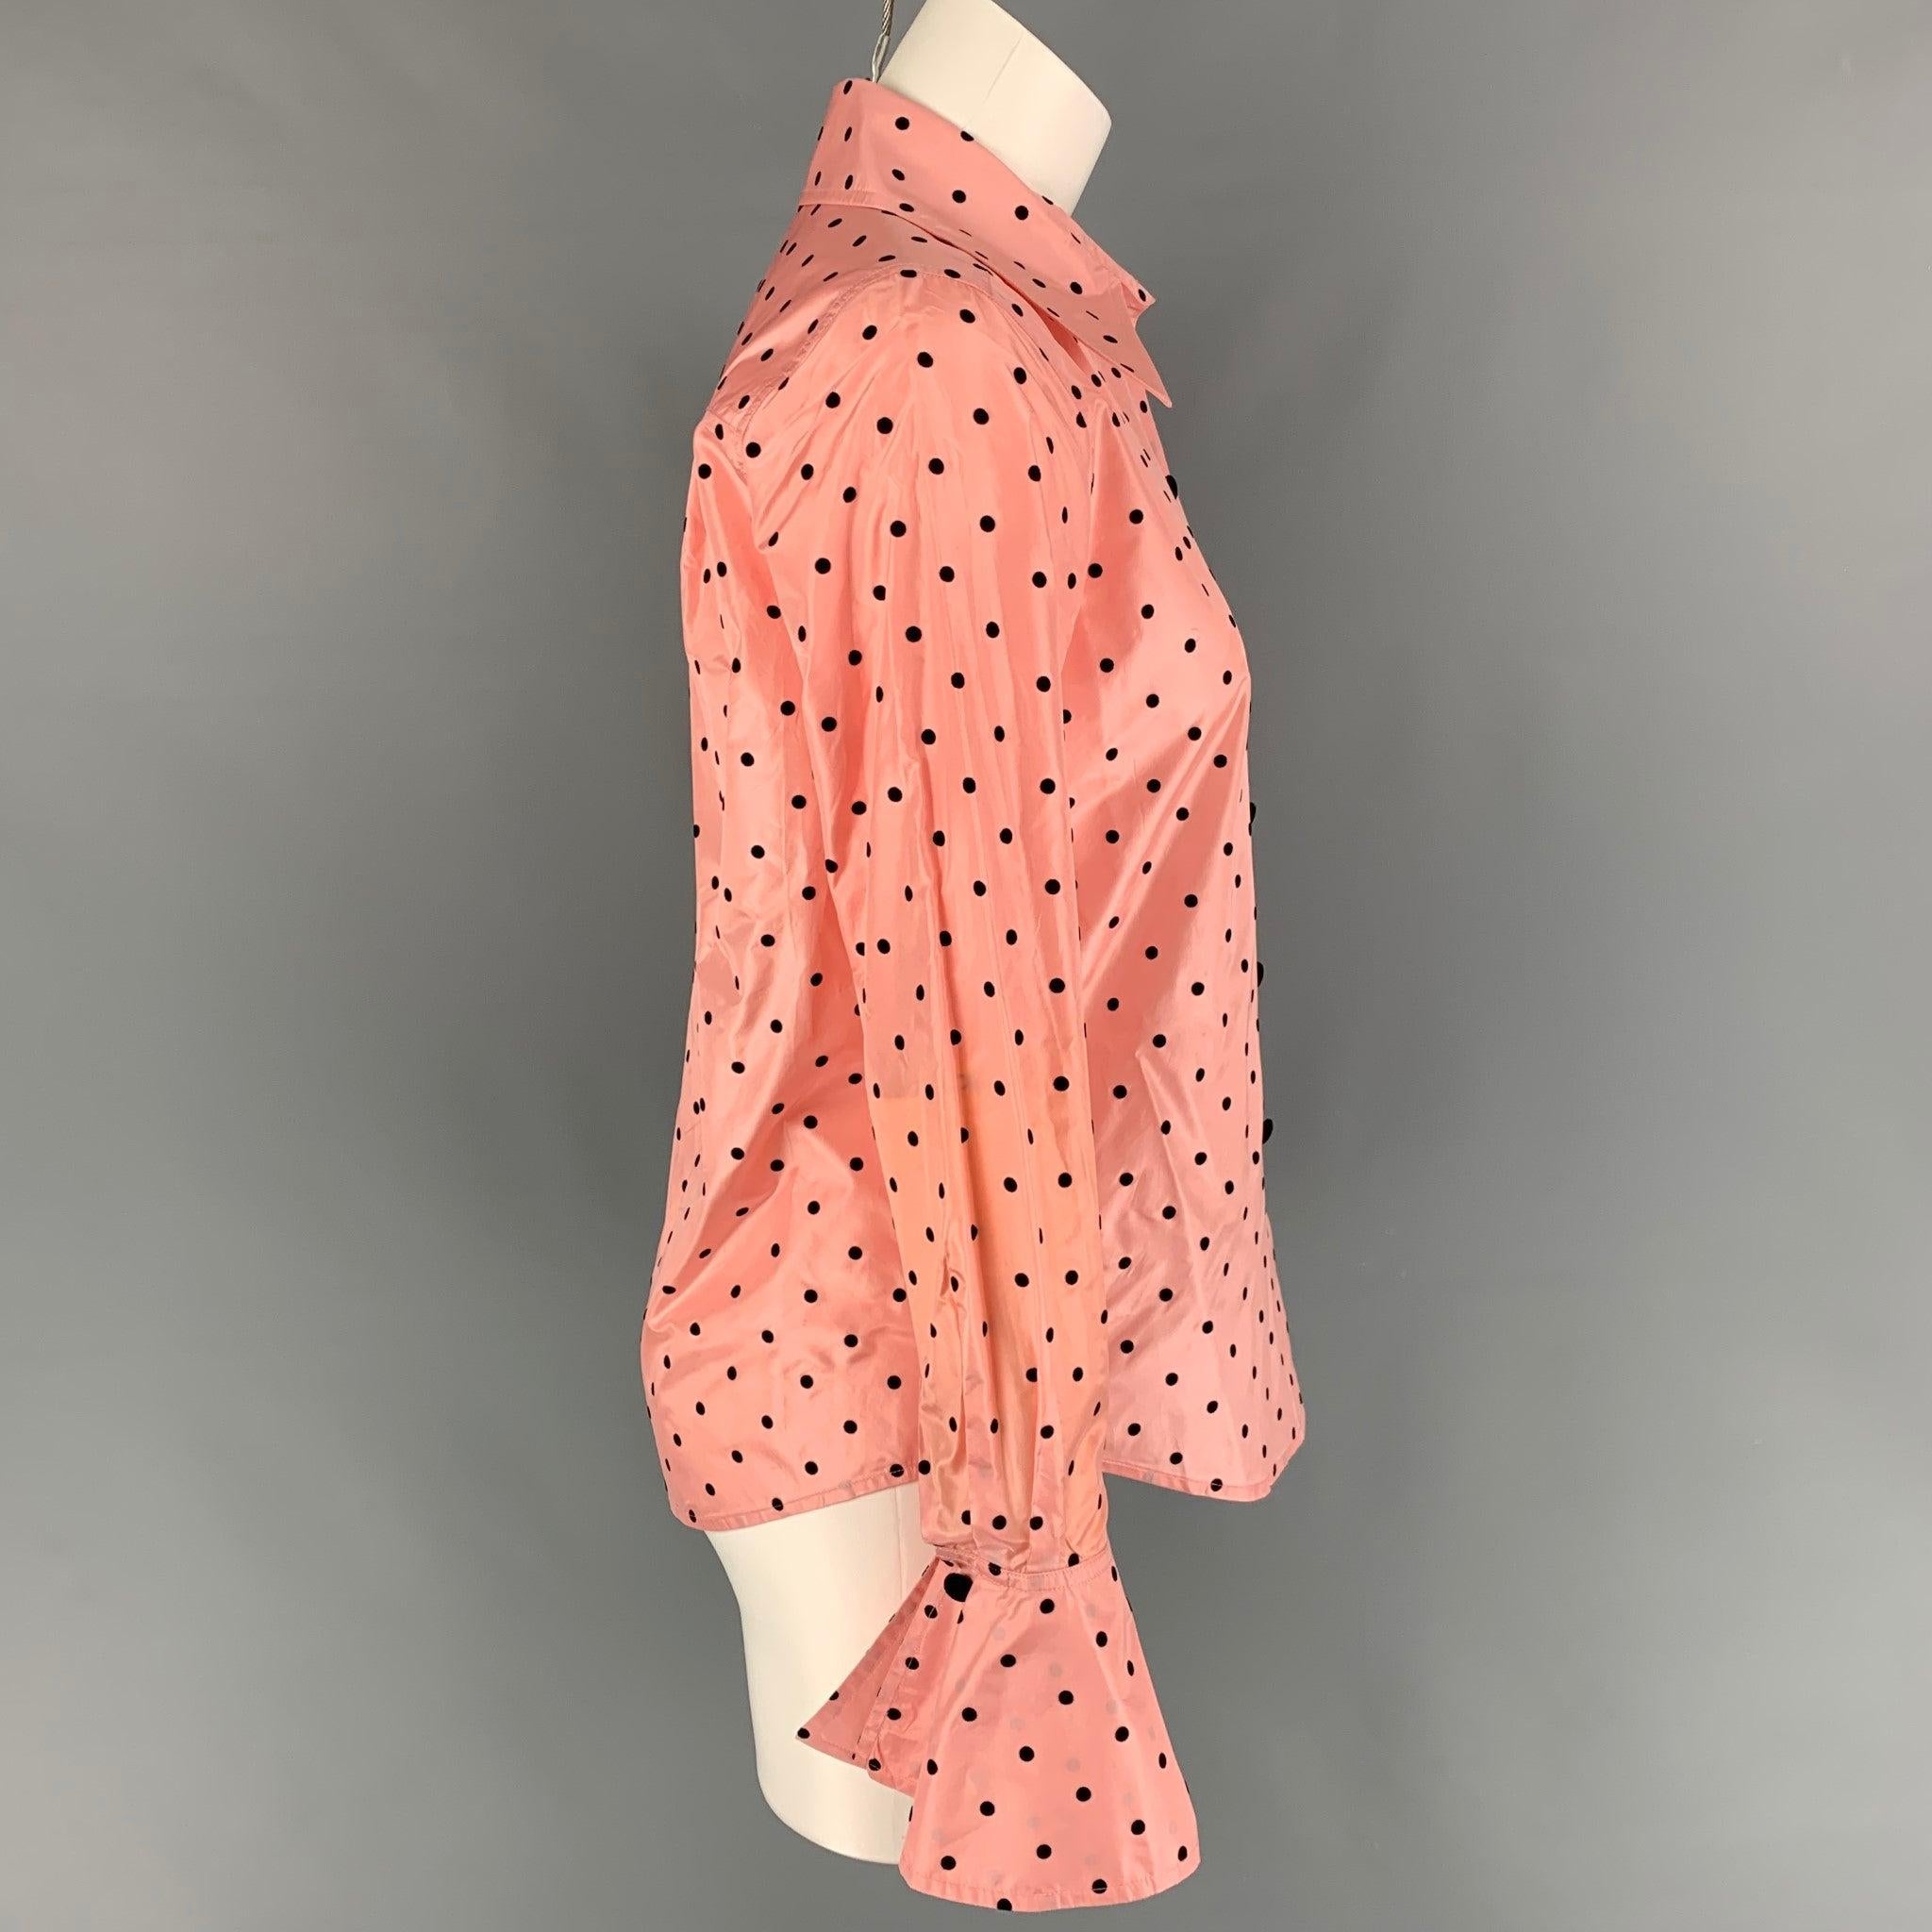 MARC JACOBS shirt comes in a pink & black polka dot silk featuring a pointed collar, french cuffs, and a buttoned closure.
Good Pre-Owned Condition. Minor marks at back. 

Marked:   0 

Measurements: 
 
Shoulder: 14.5 inches  Bust: 36 inches 